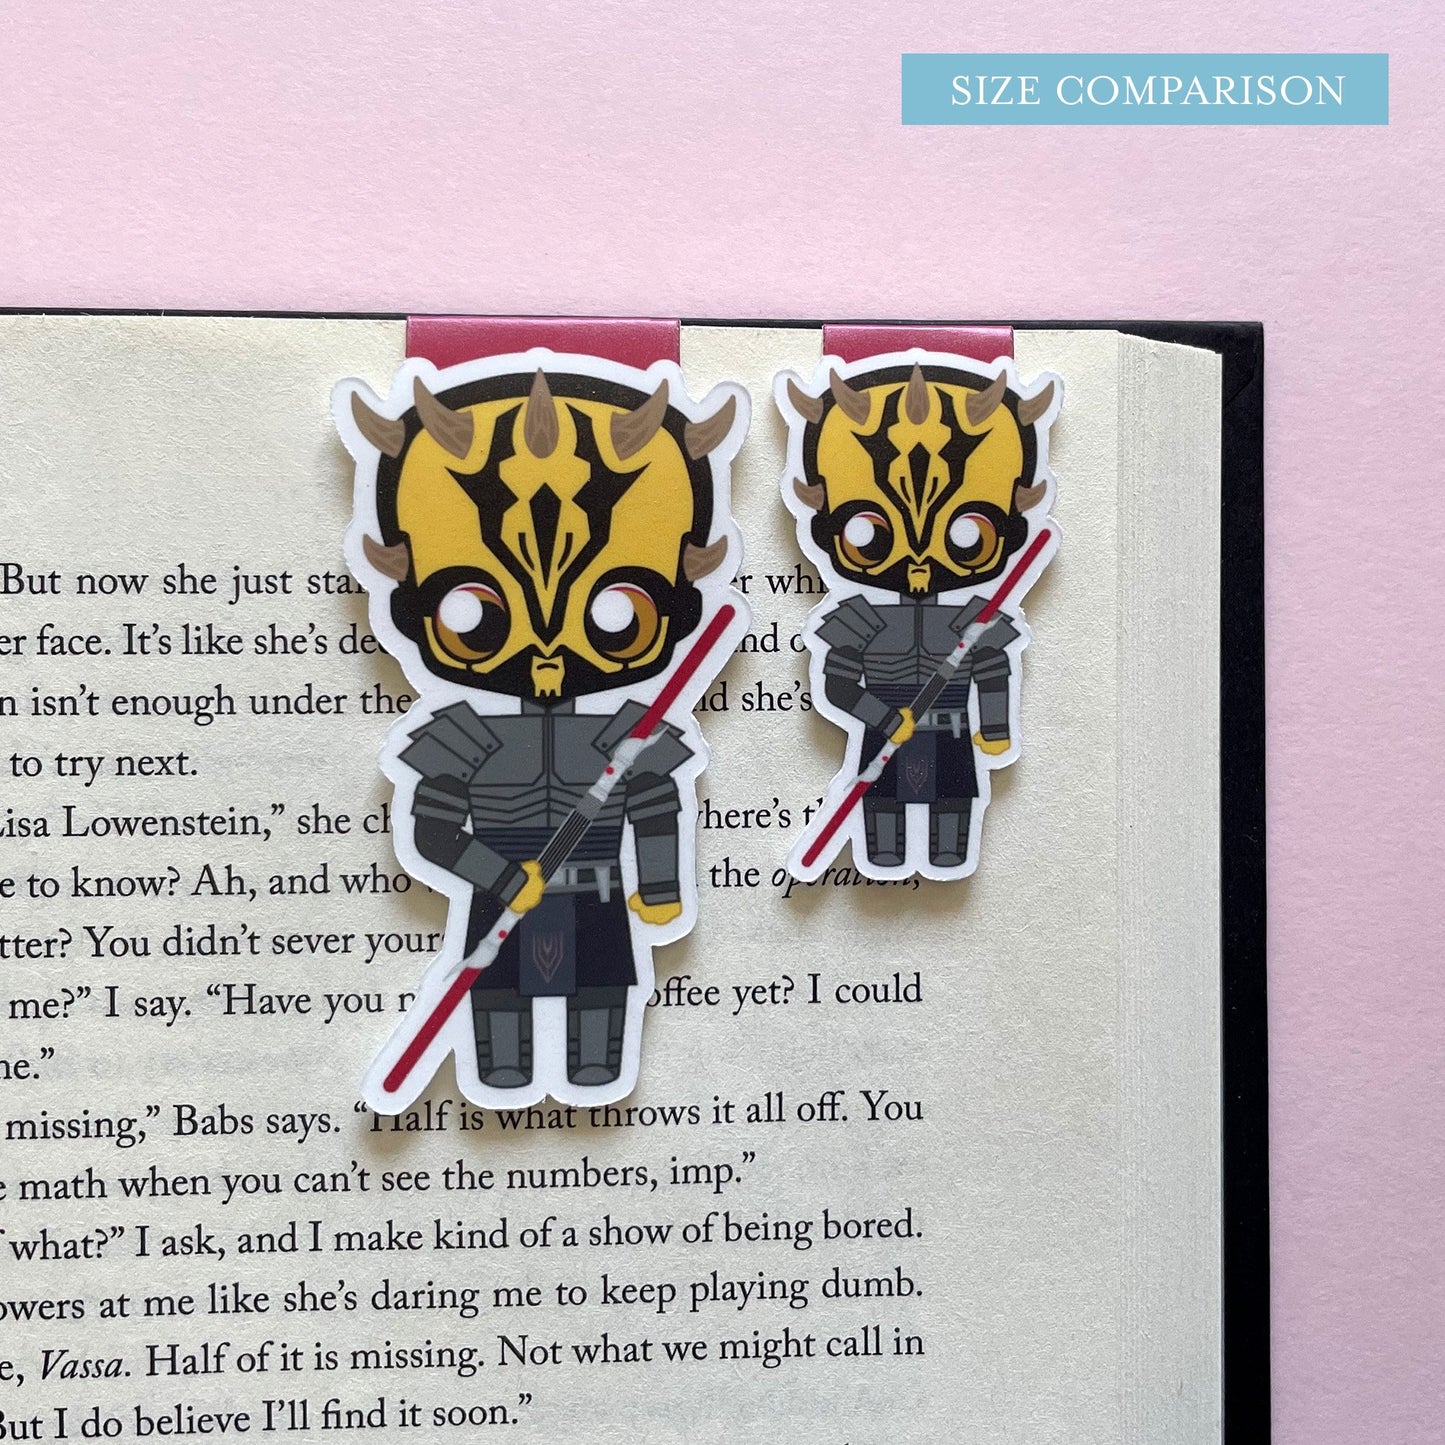 Space Wizards "Opress Brothers" Savage, Maul, and Feral Magnetic Bookmark Trio